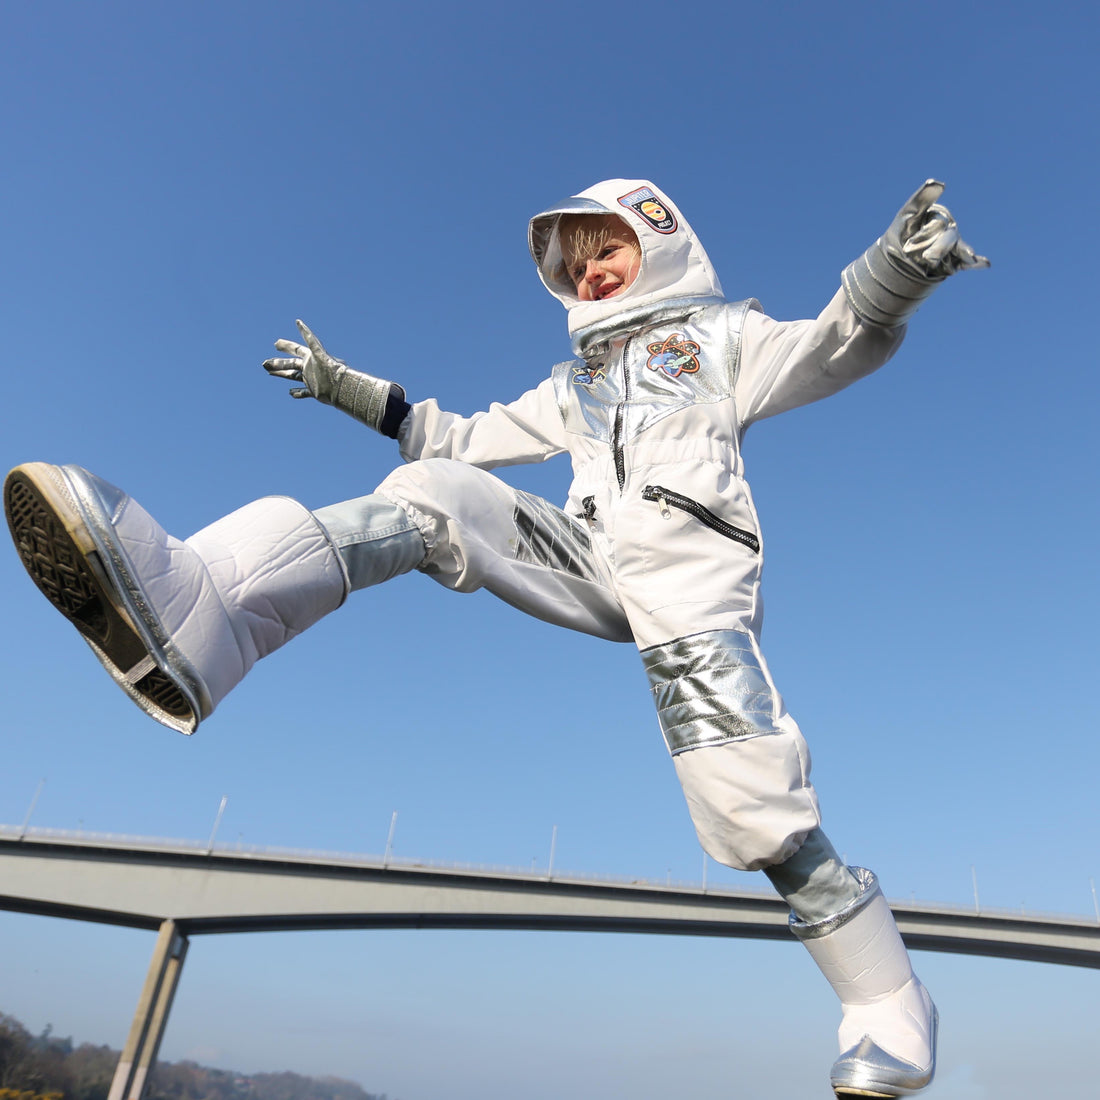 Astronauts needed for an out of this world record attempt